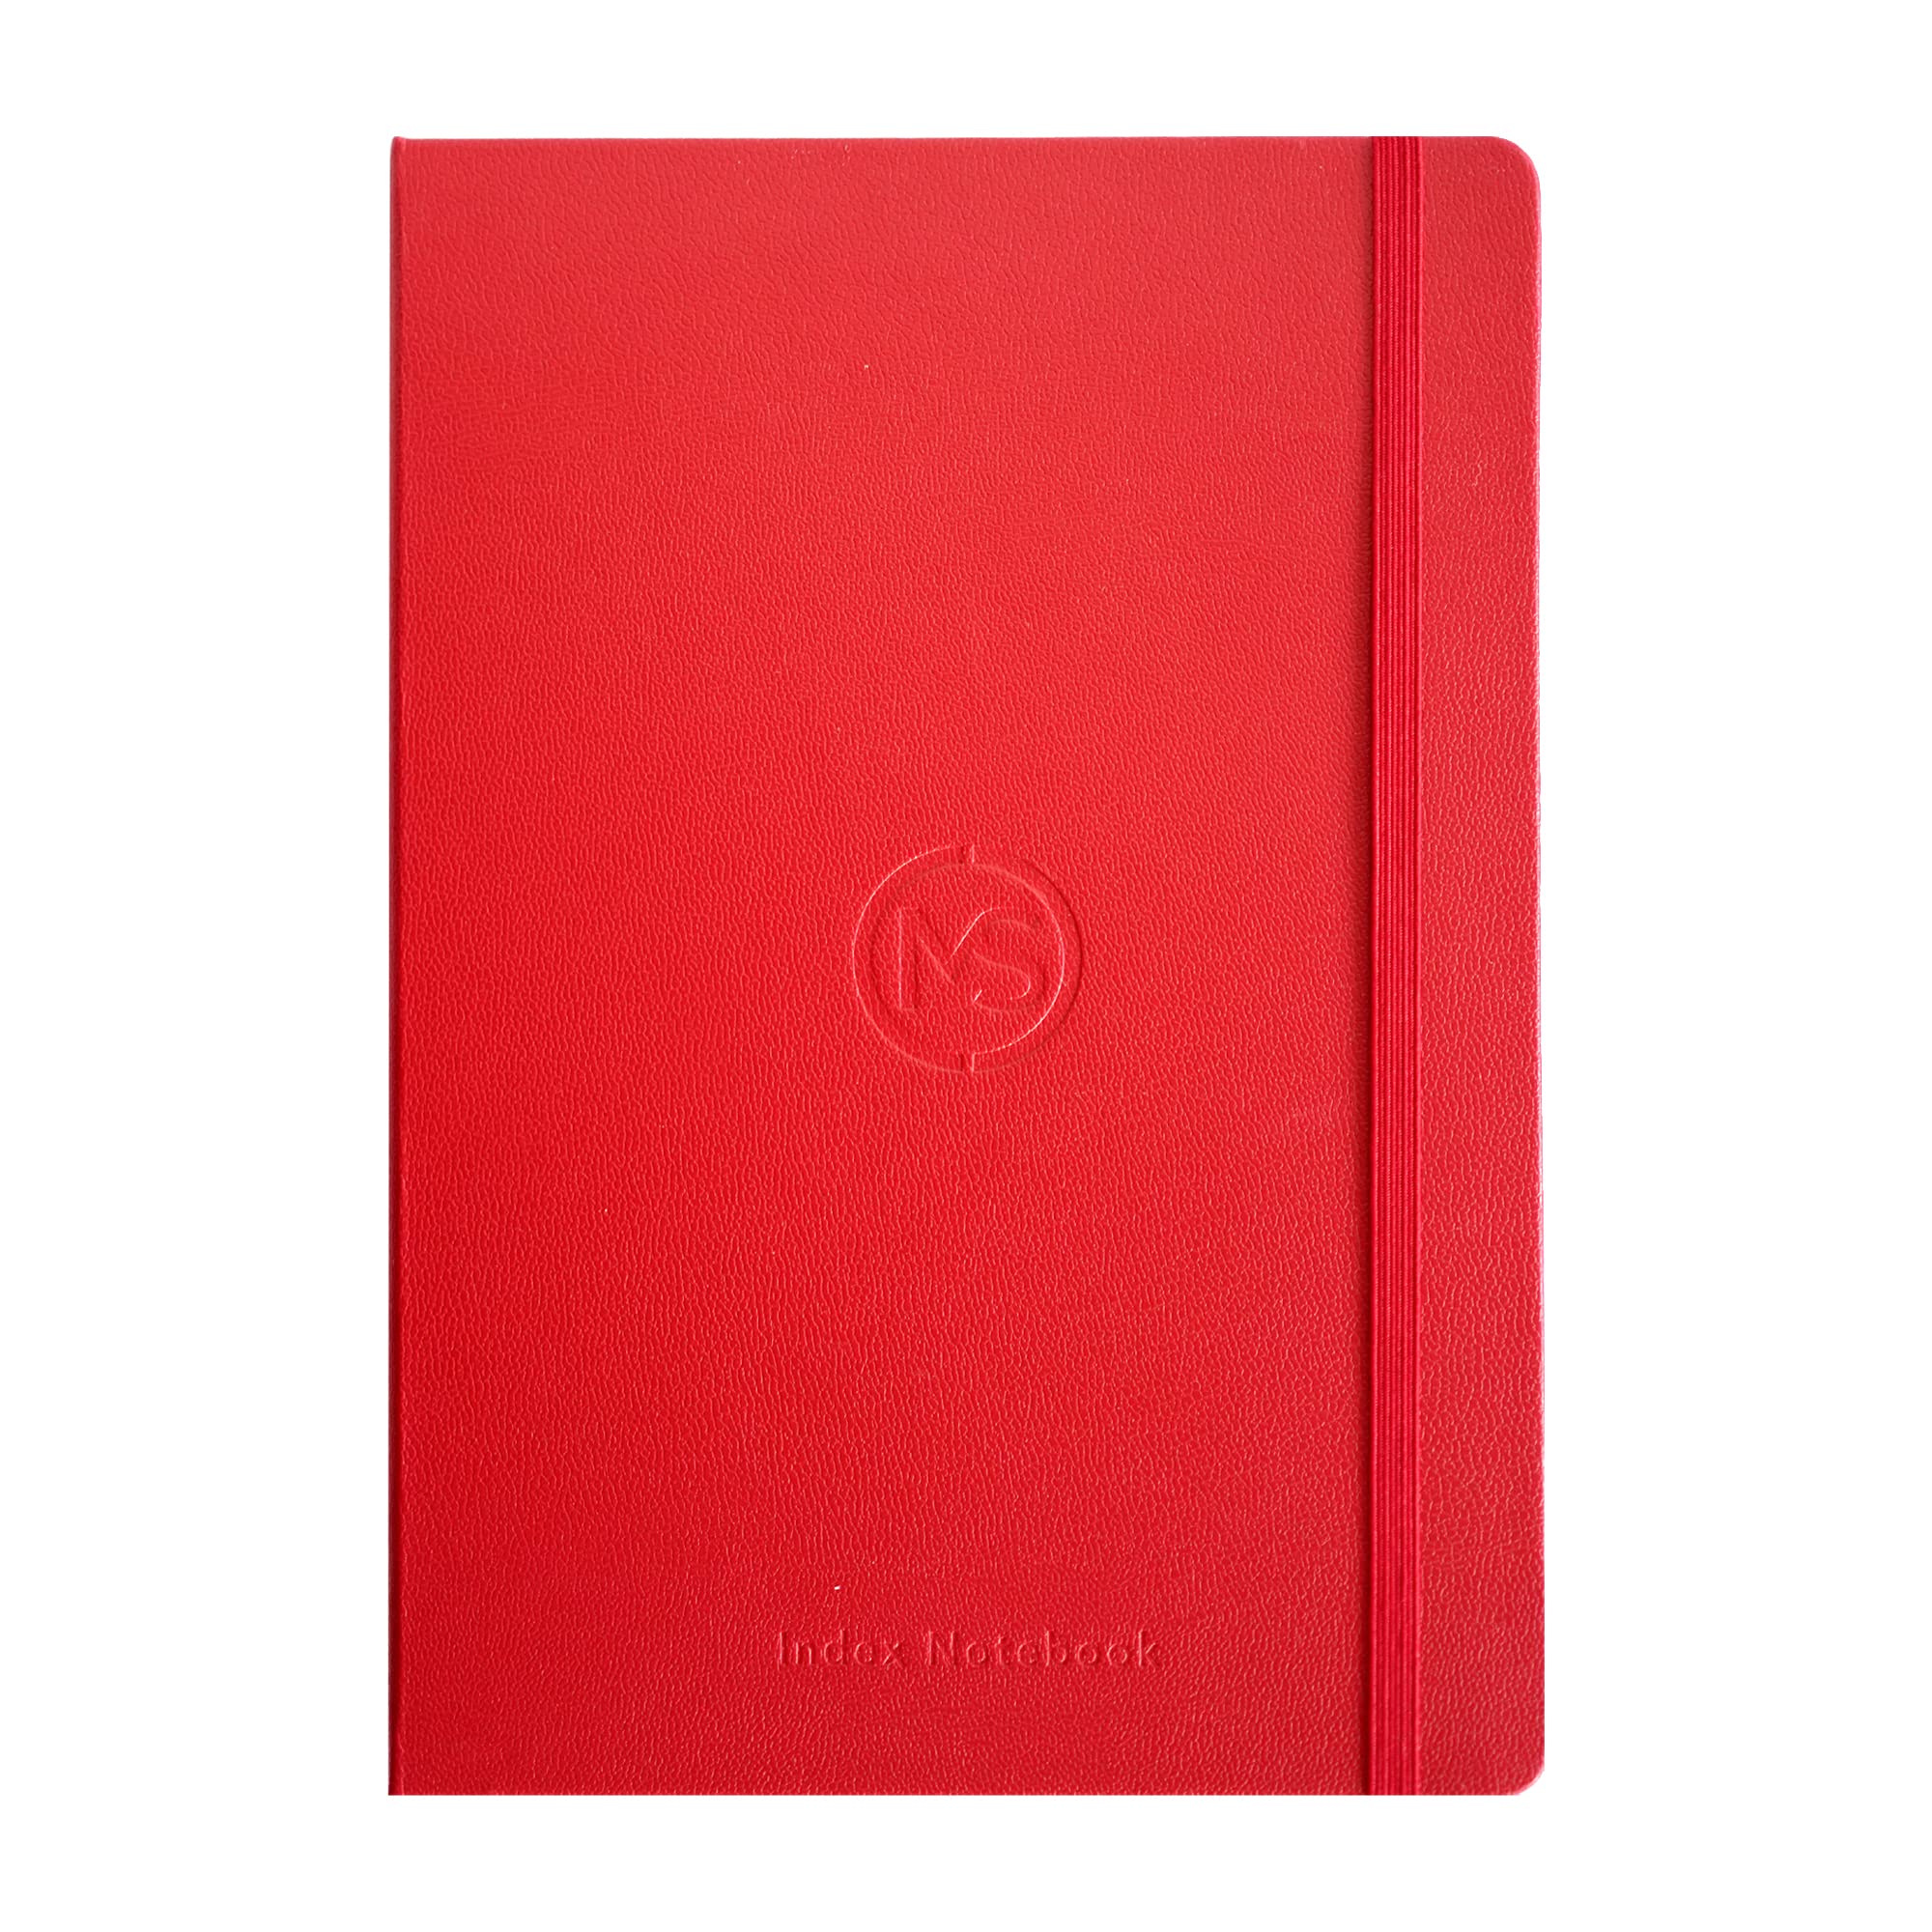 A6 Index Notebook Hardback Leatherette Cover 8mm Ruled Margin A-Z Tabs 264 Pages 100 GSM White Paper – 11 X 16 CM Index Notebook (Red)